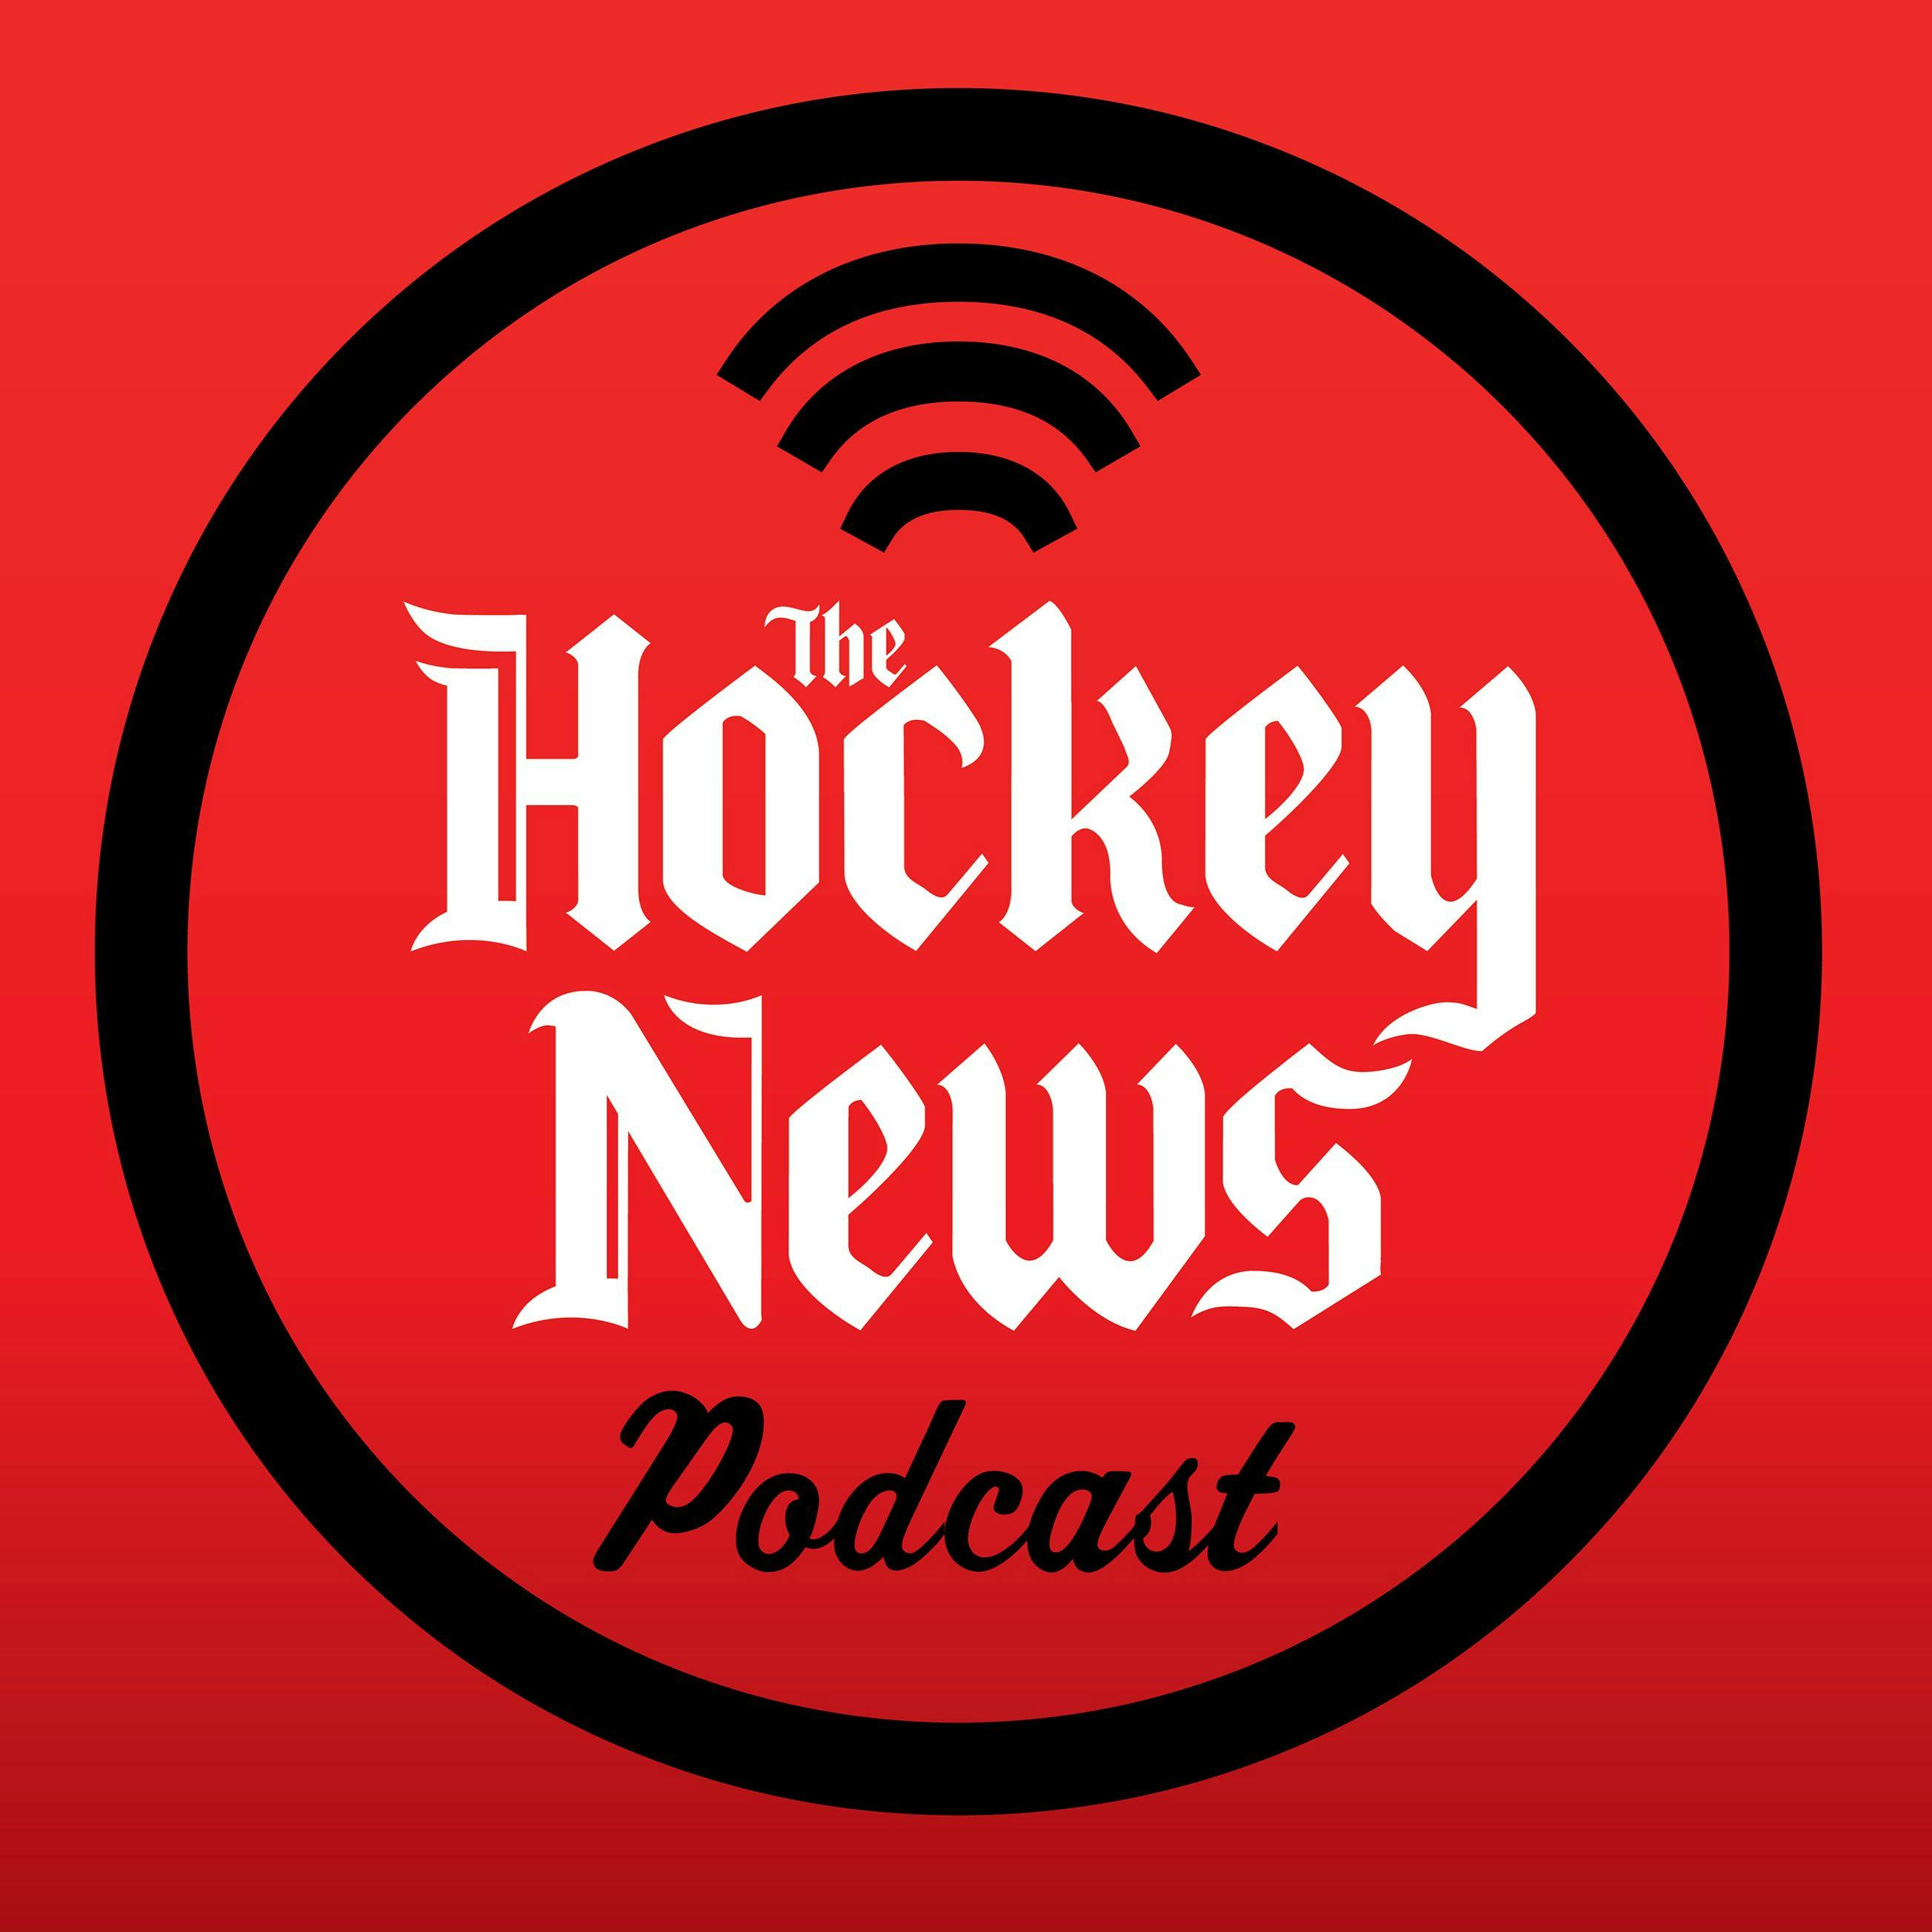 The Hockey News Podcast: What If Barry Trotz Returned to the Islanders?